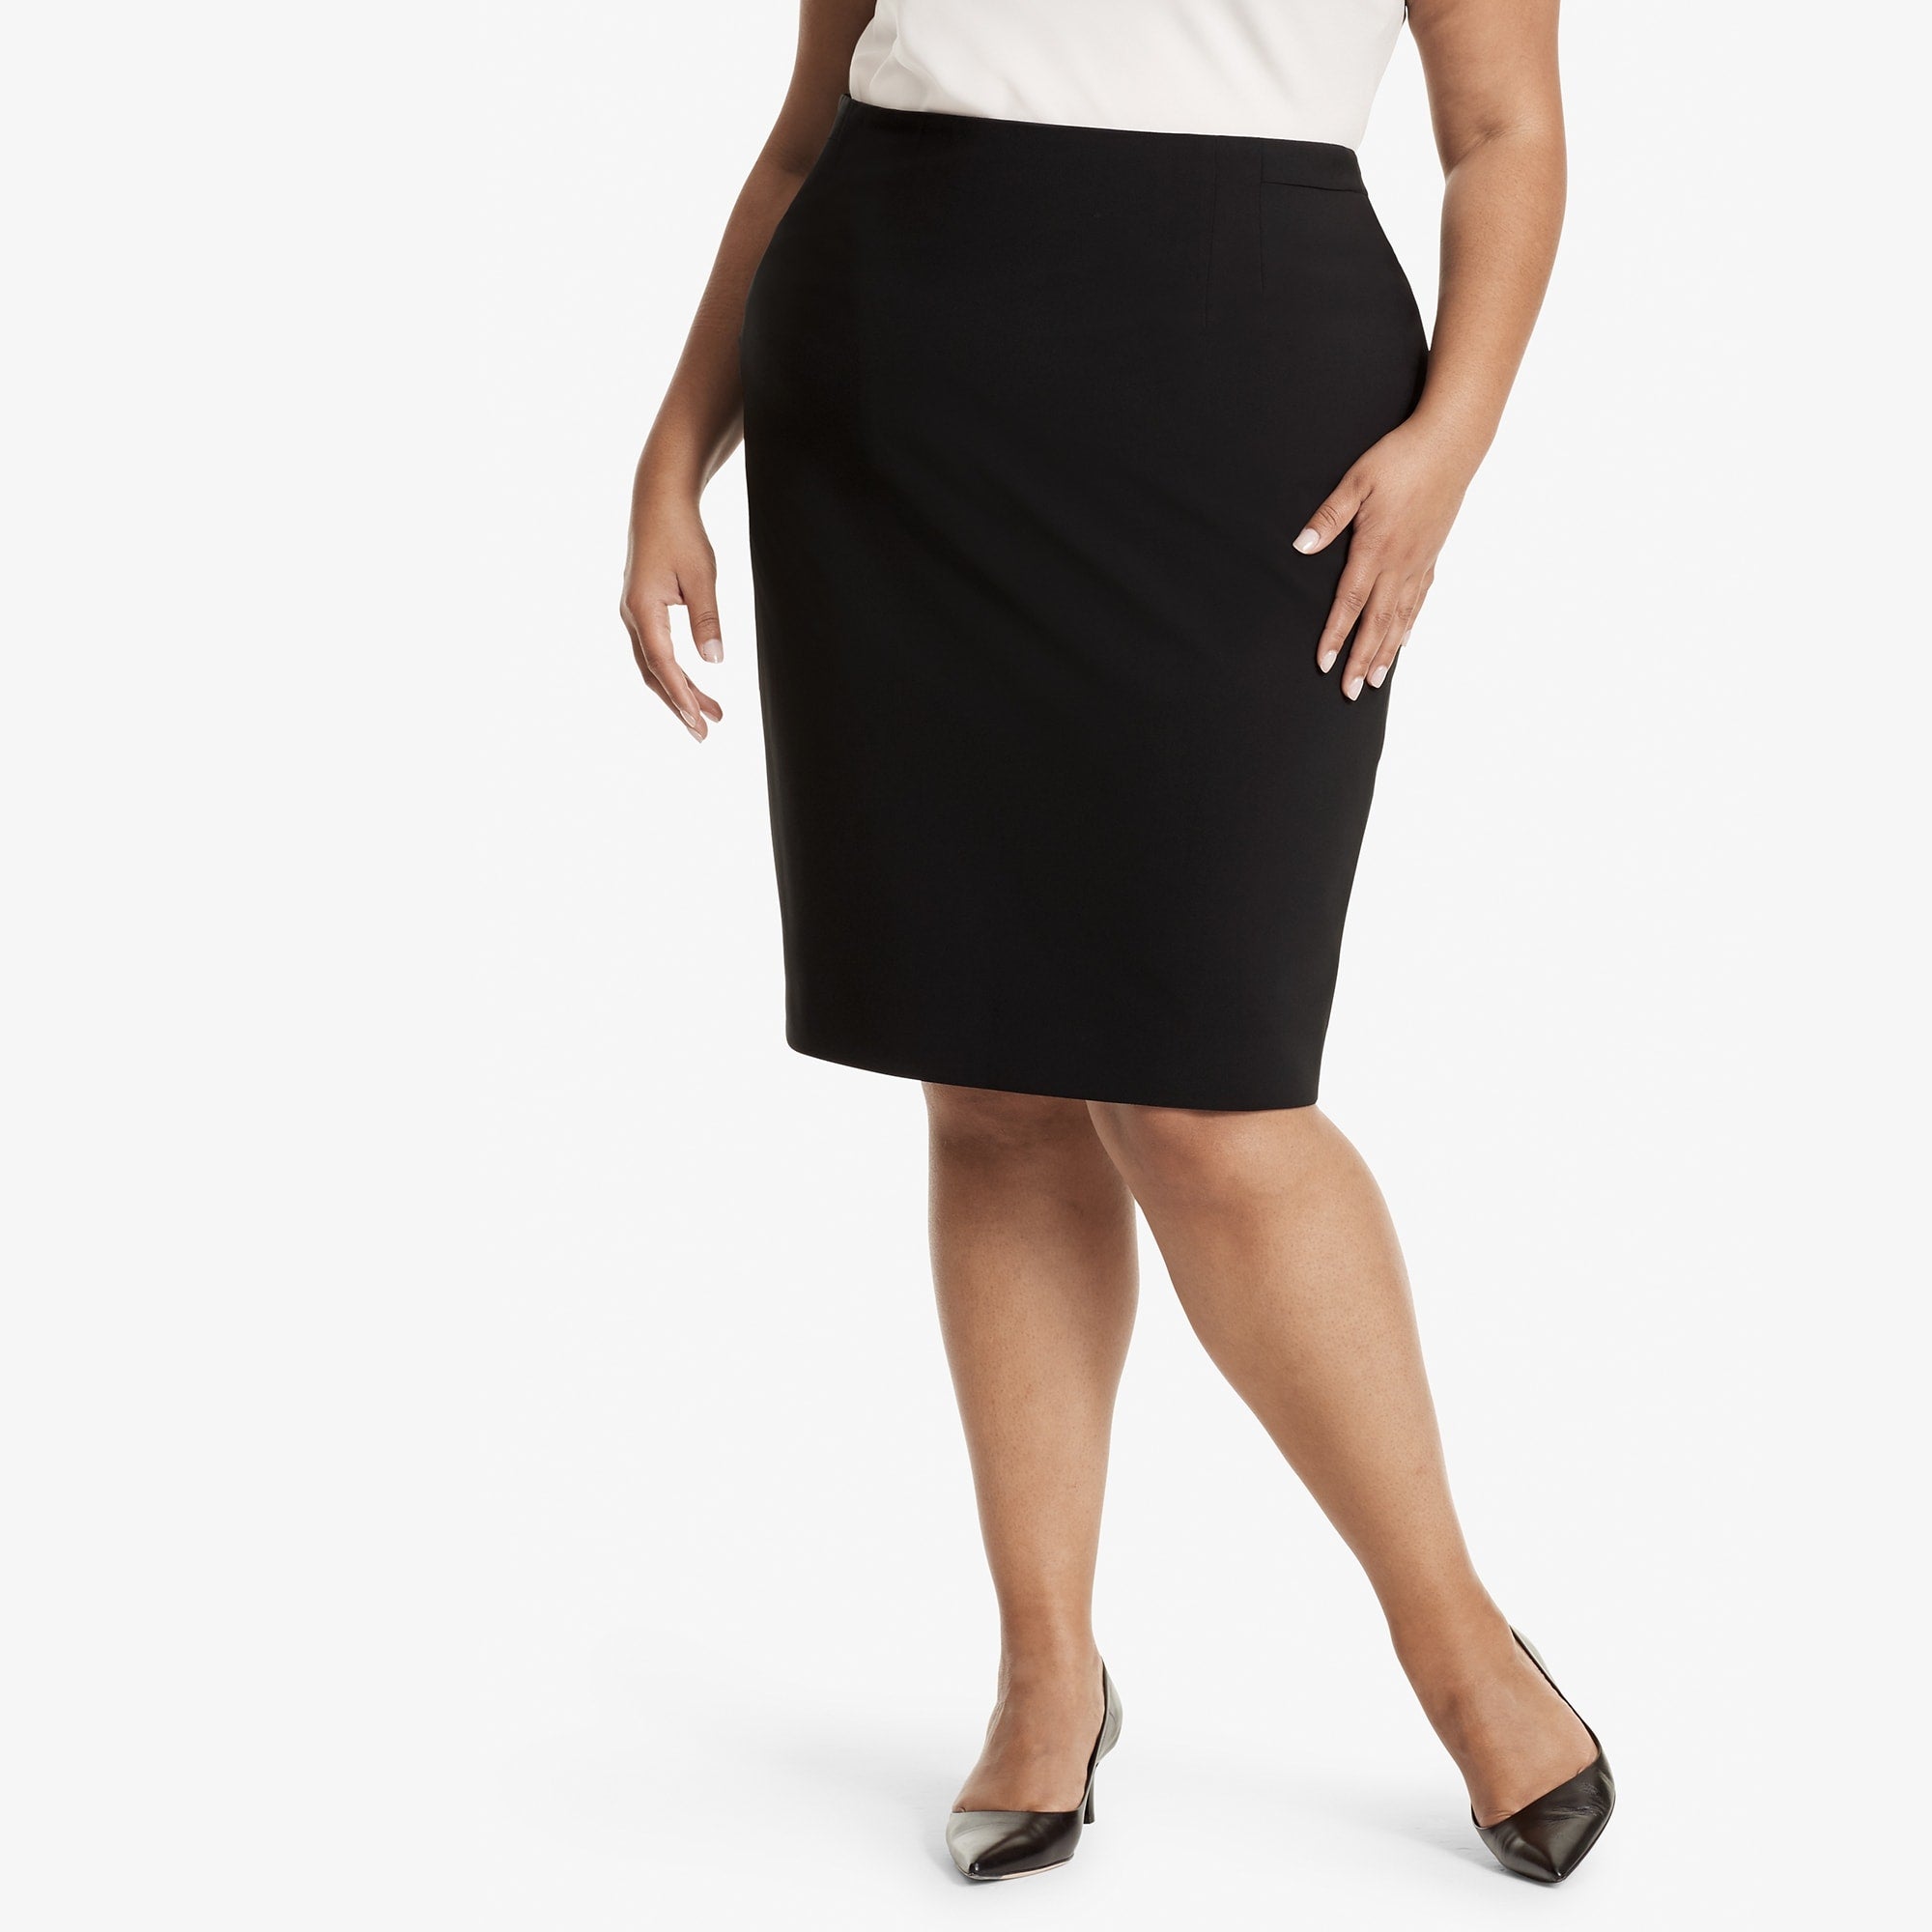 Front image of a woman standing wearing the Cobble hill skirt in Black